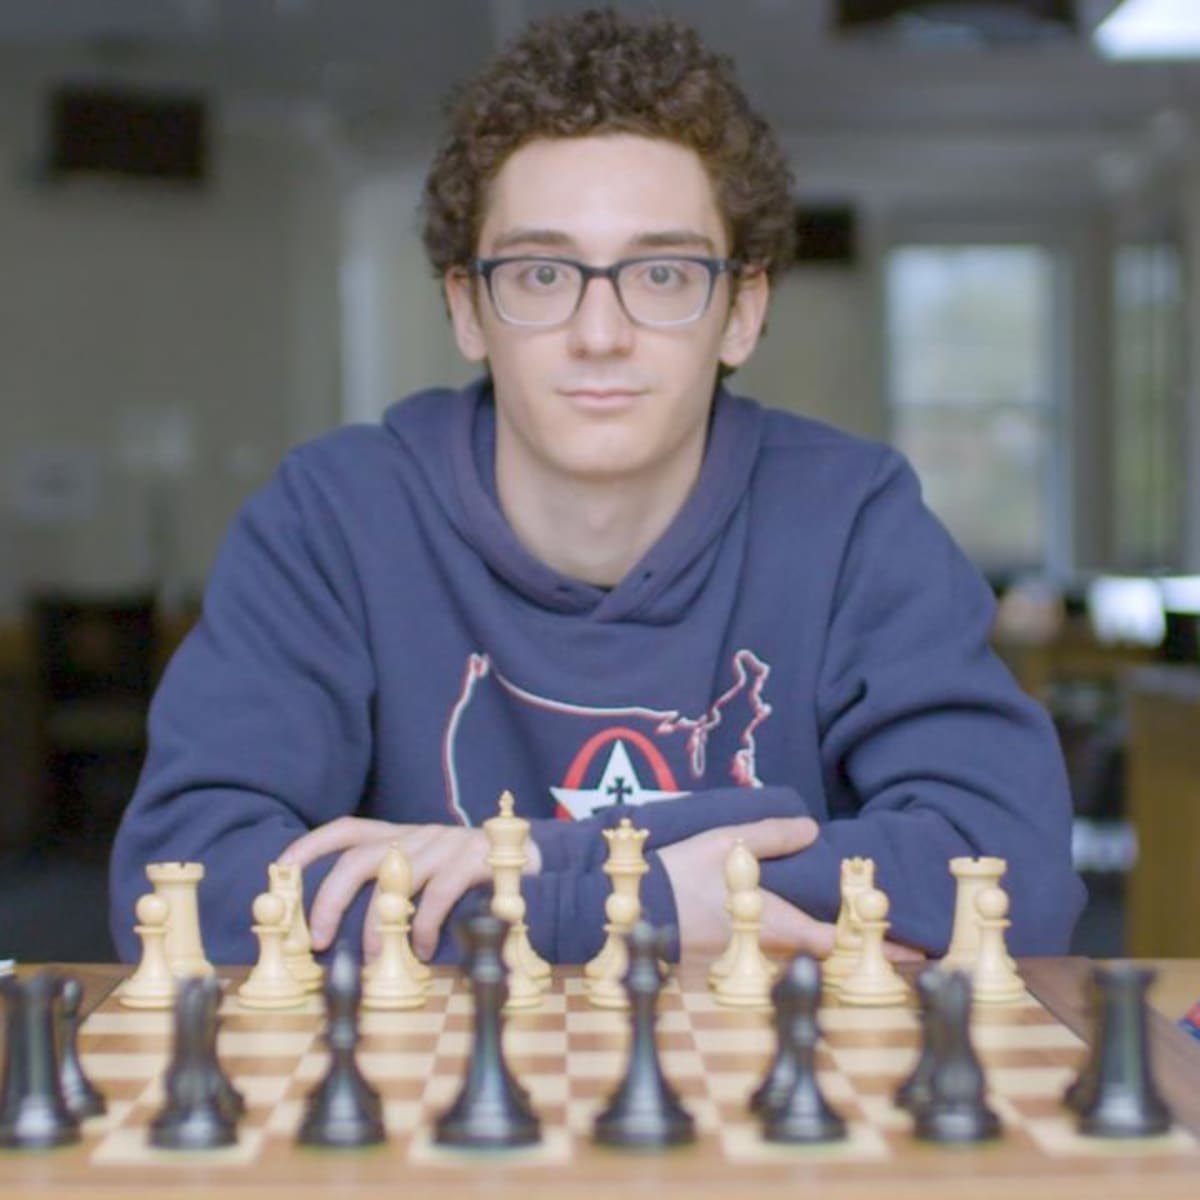 Why is Fabiano Caruana Dominating the Strongest Chess Tournament Ever? –  Daily Chess Musings